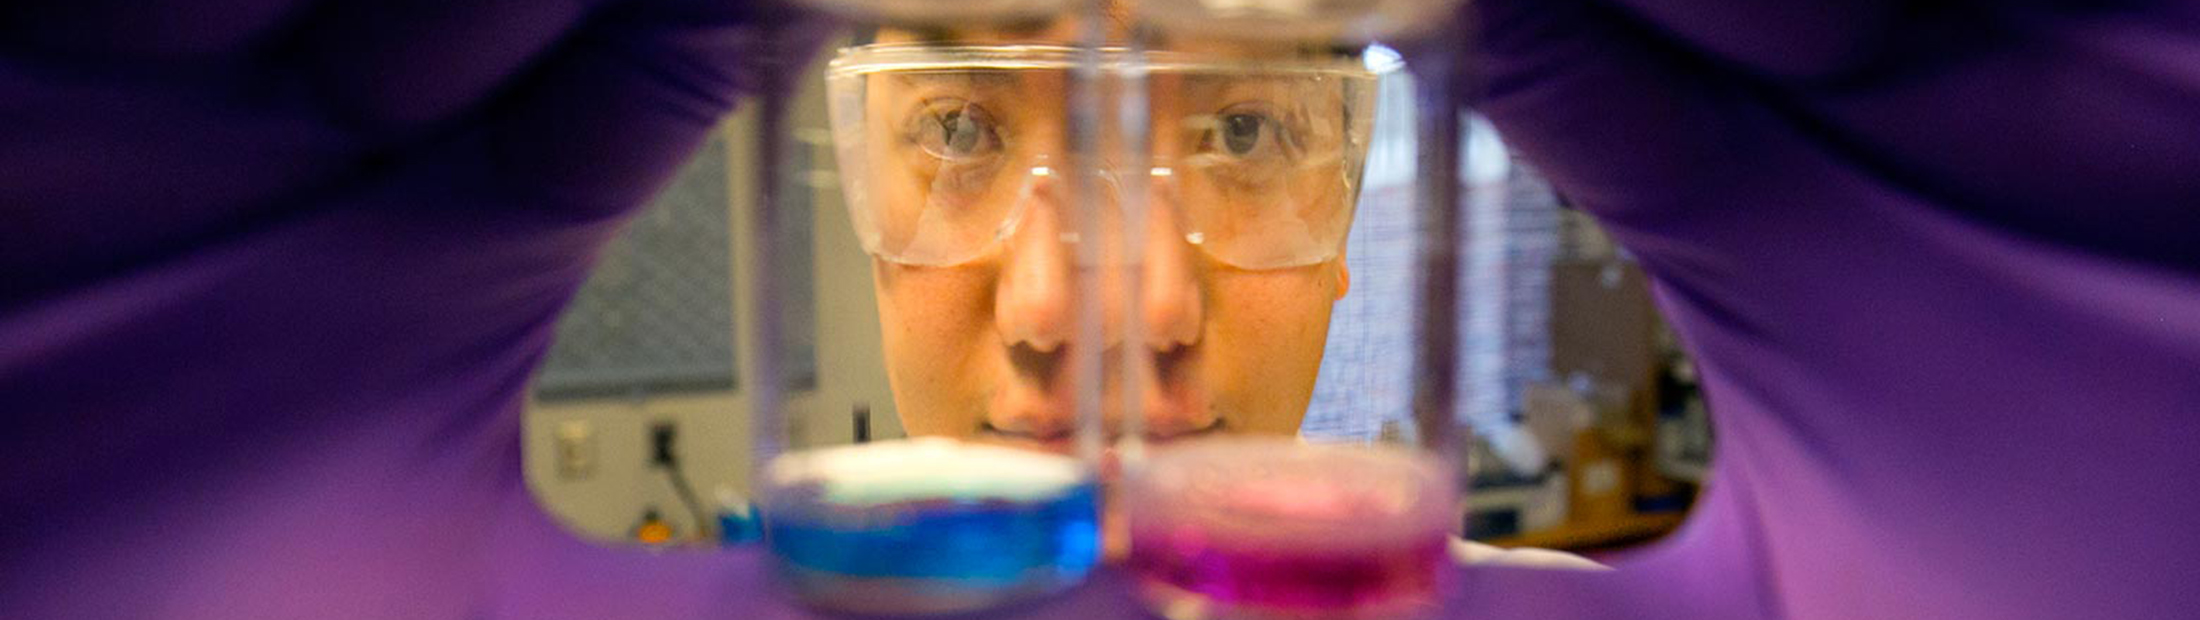 A researcher holds up a vial of blue liquid and a vial of pink liquid.